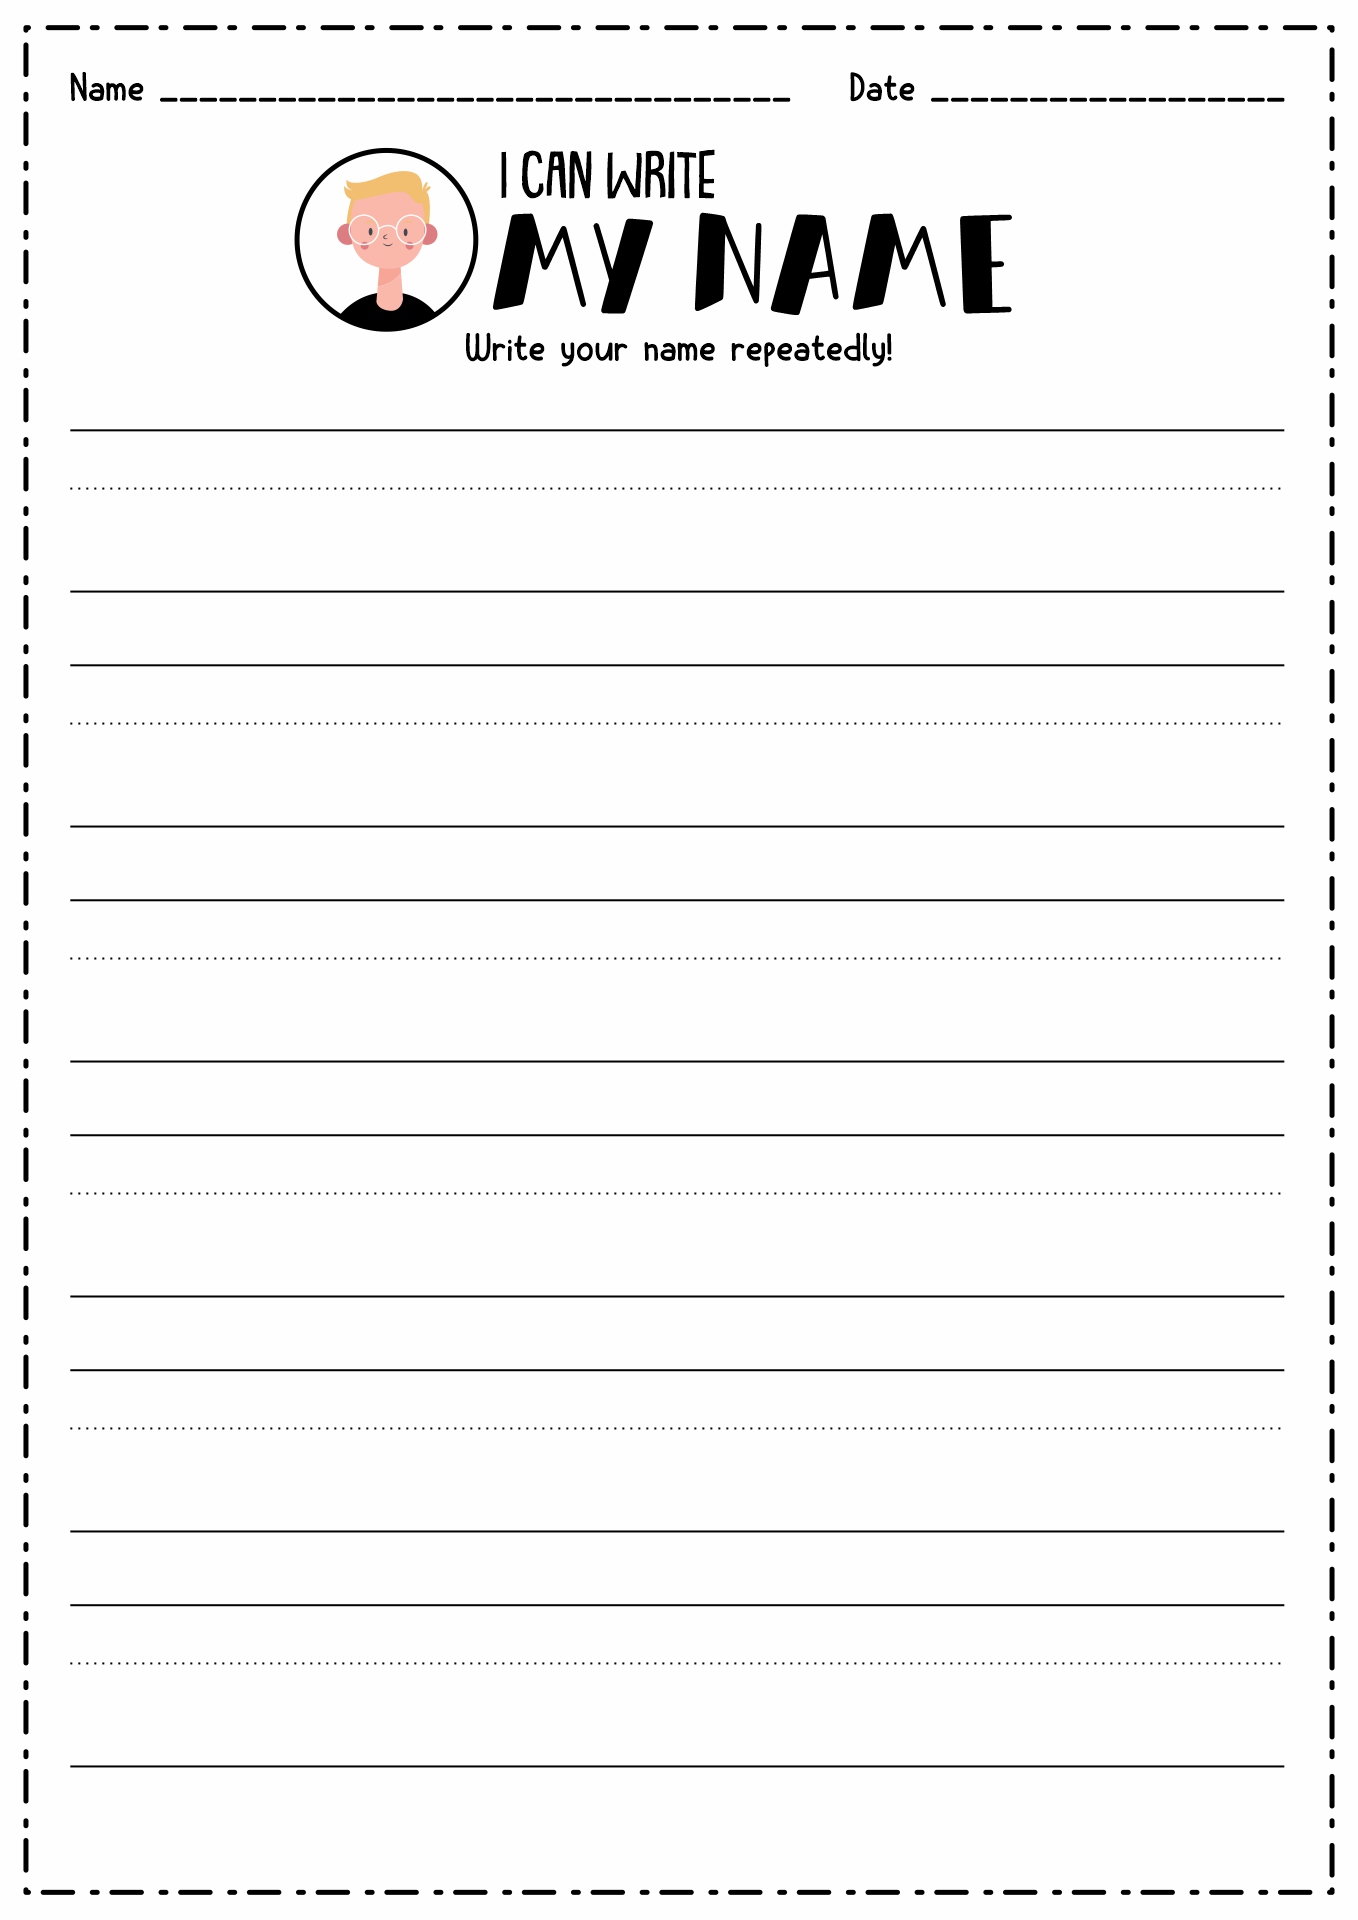 14 Best Images of Create Name Tracing Worksheets Create